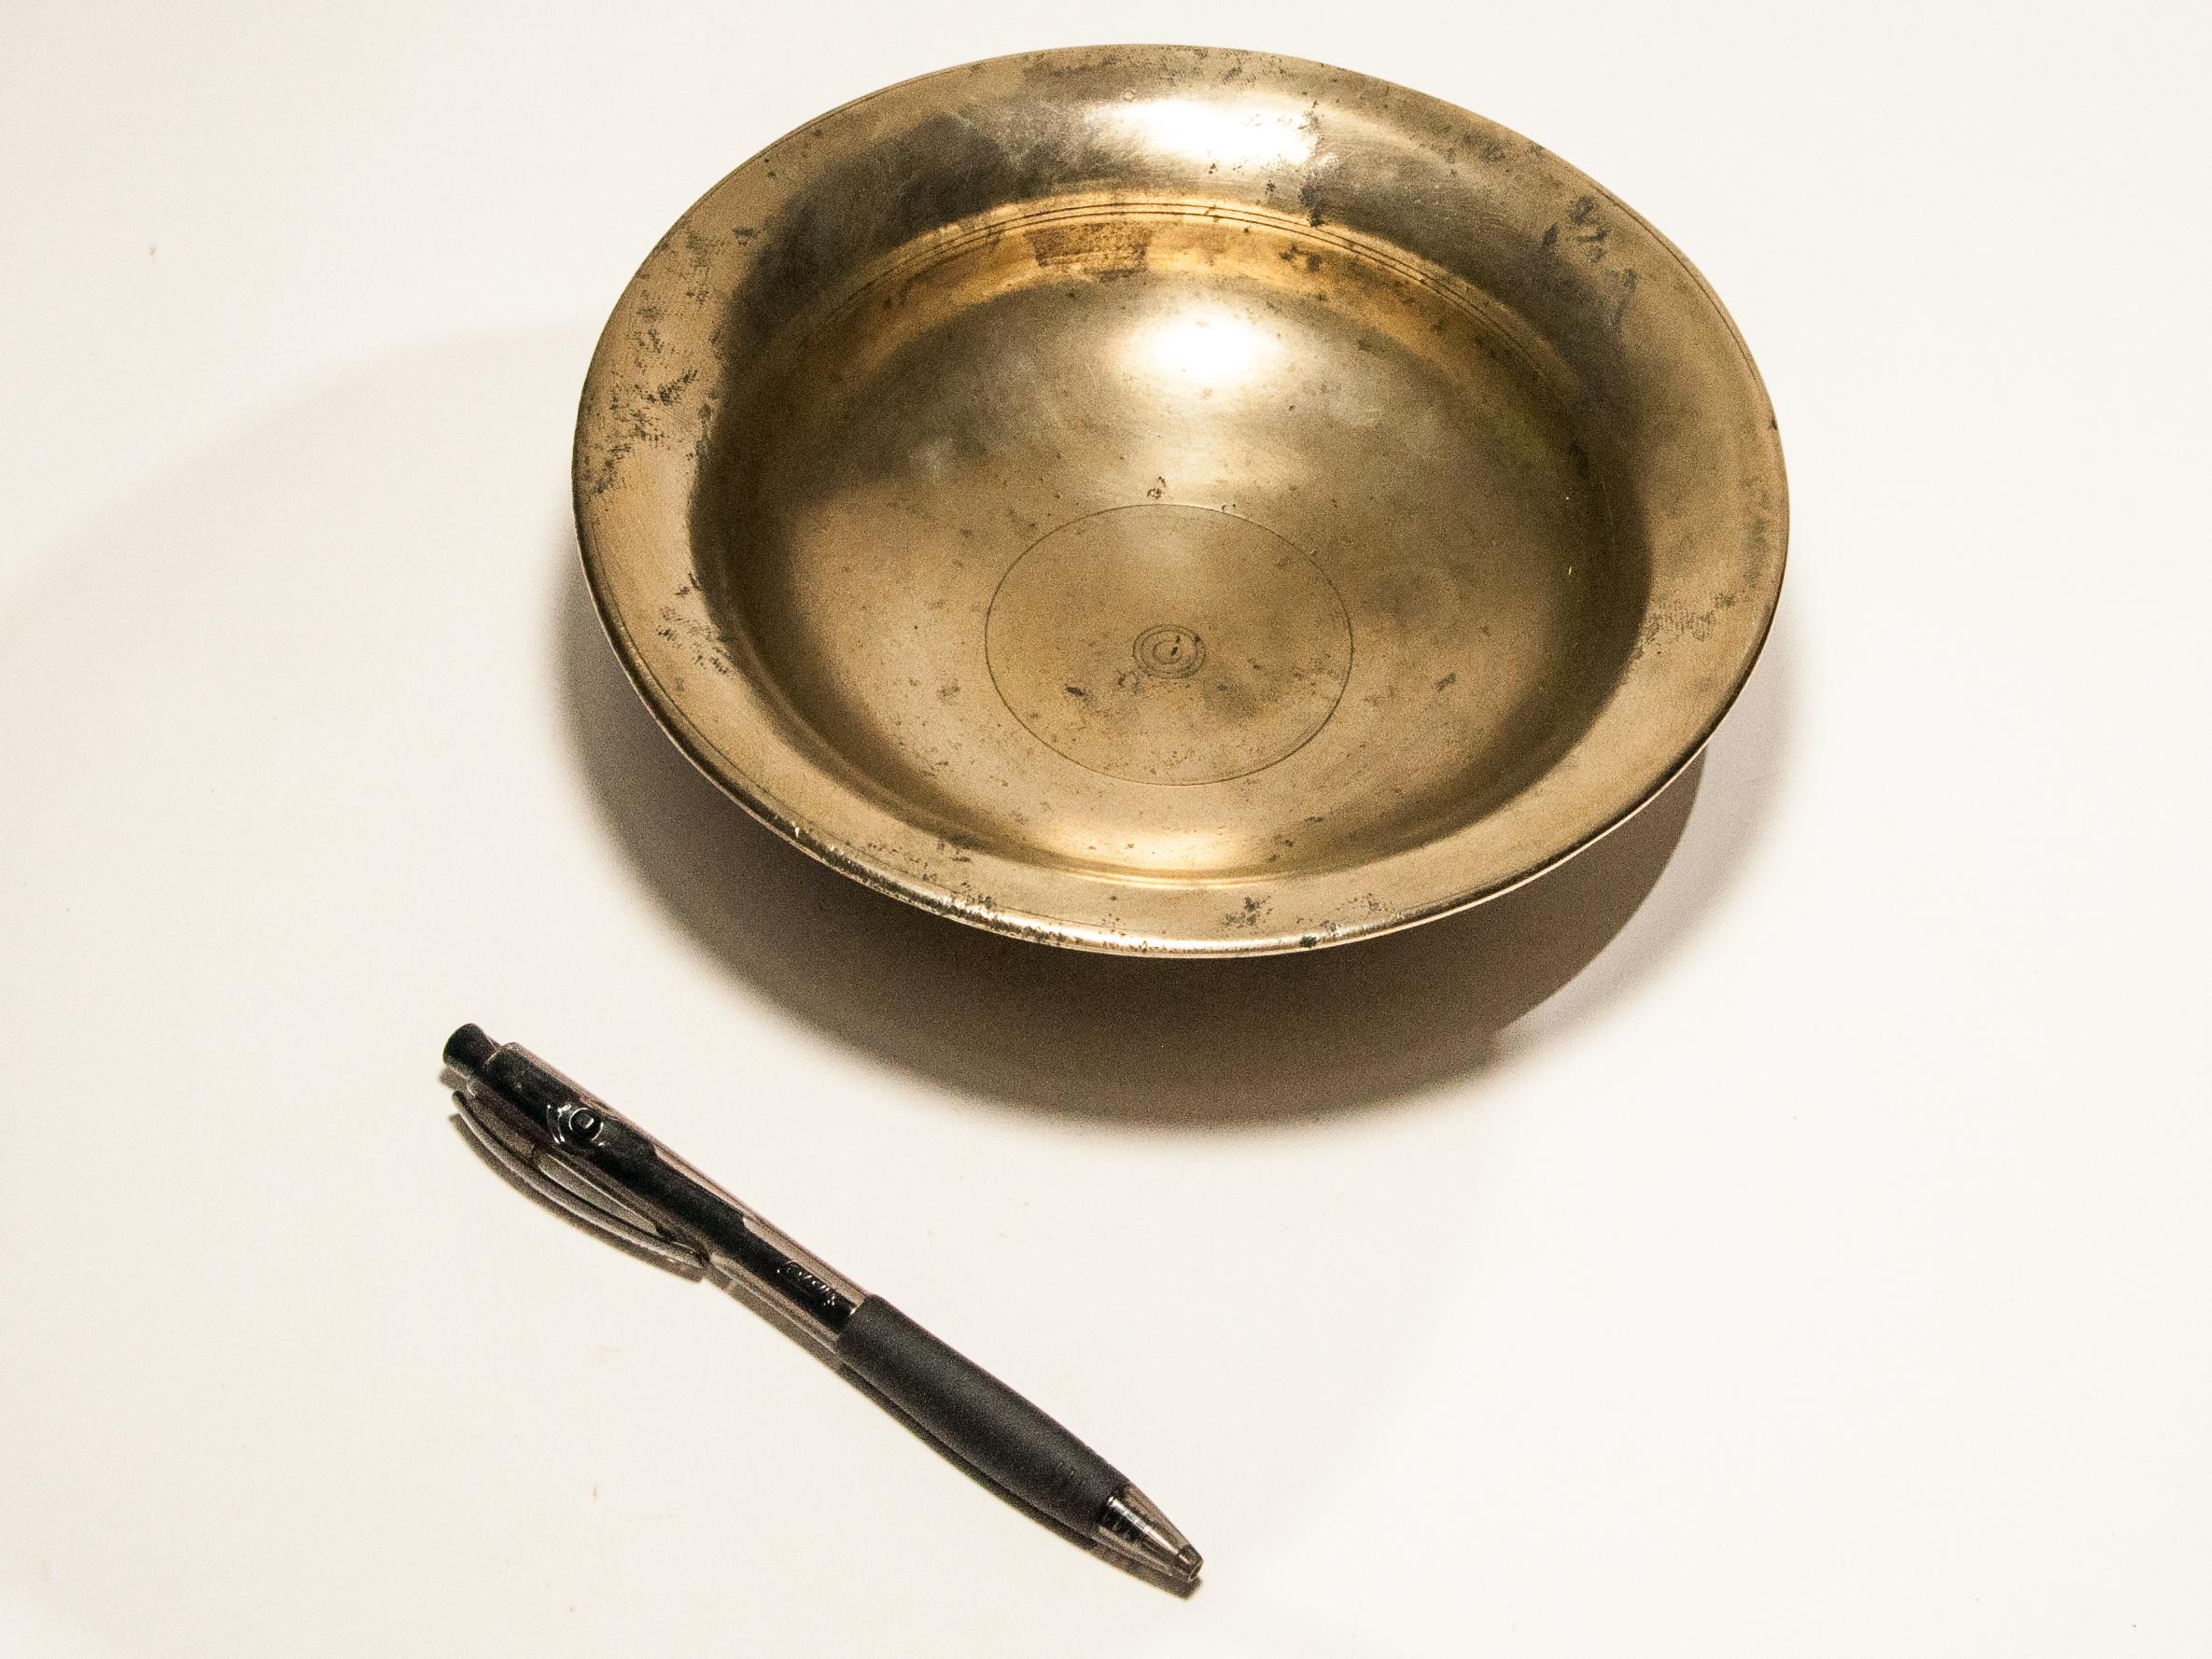 Tibetan Tsampa bowl. Bronze, Tibet, early to mid-20th century.
Offered by Bruce Hughes.
Tsampa is a Tibetan staple found throughout Tibet as well as among the Tibetan speaking peoples of the high Himalayan valleys of the India / Nepal / Tibet